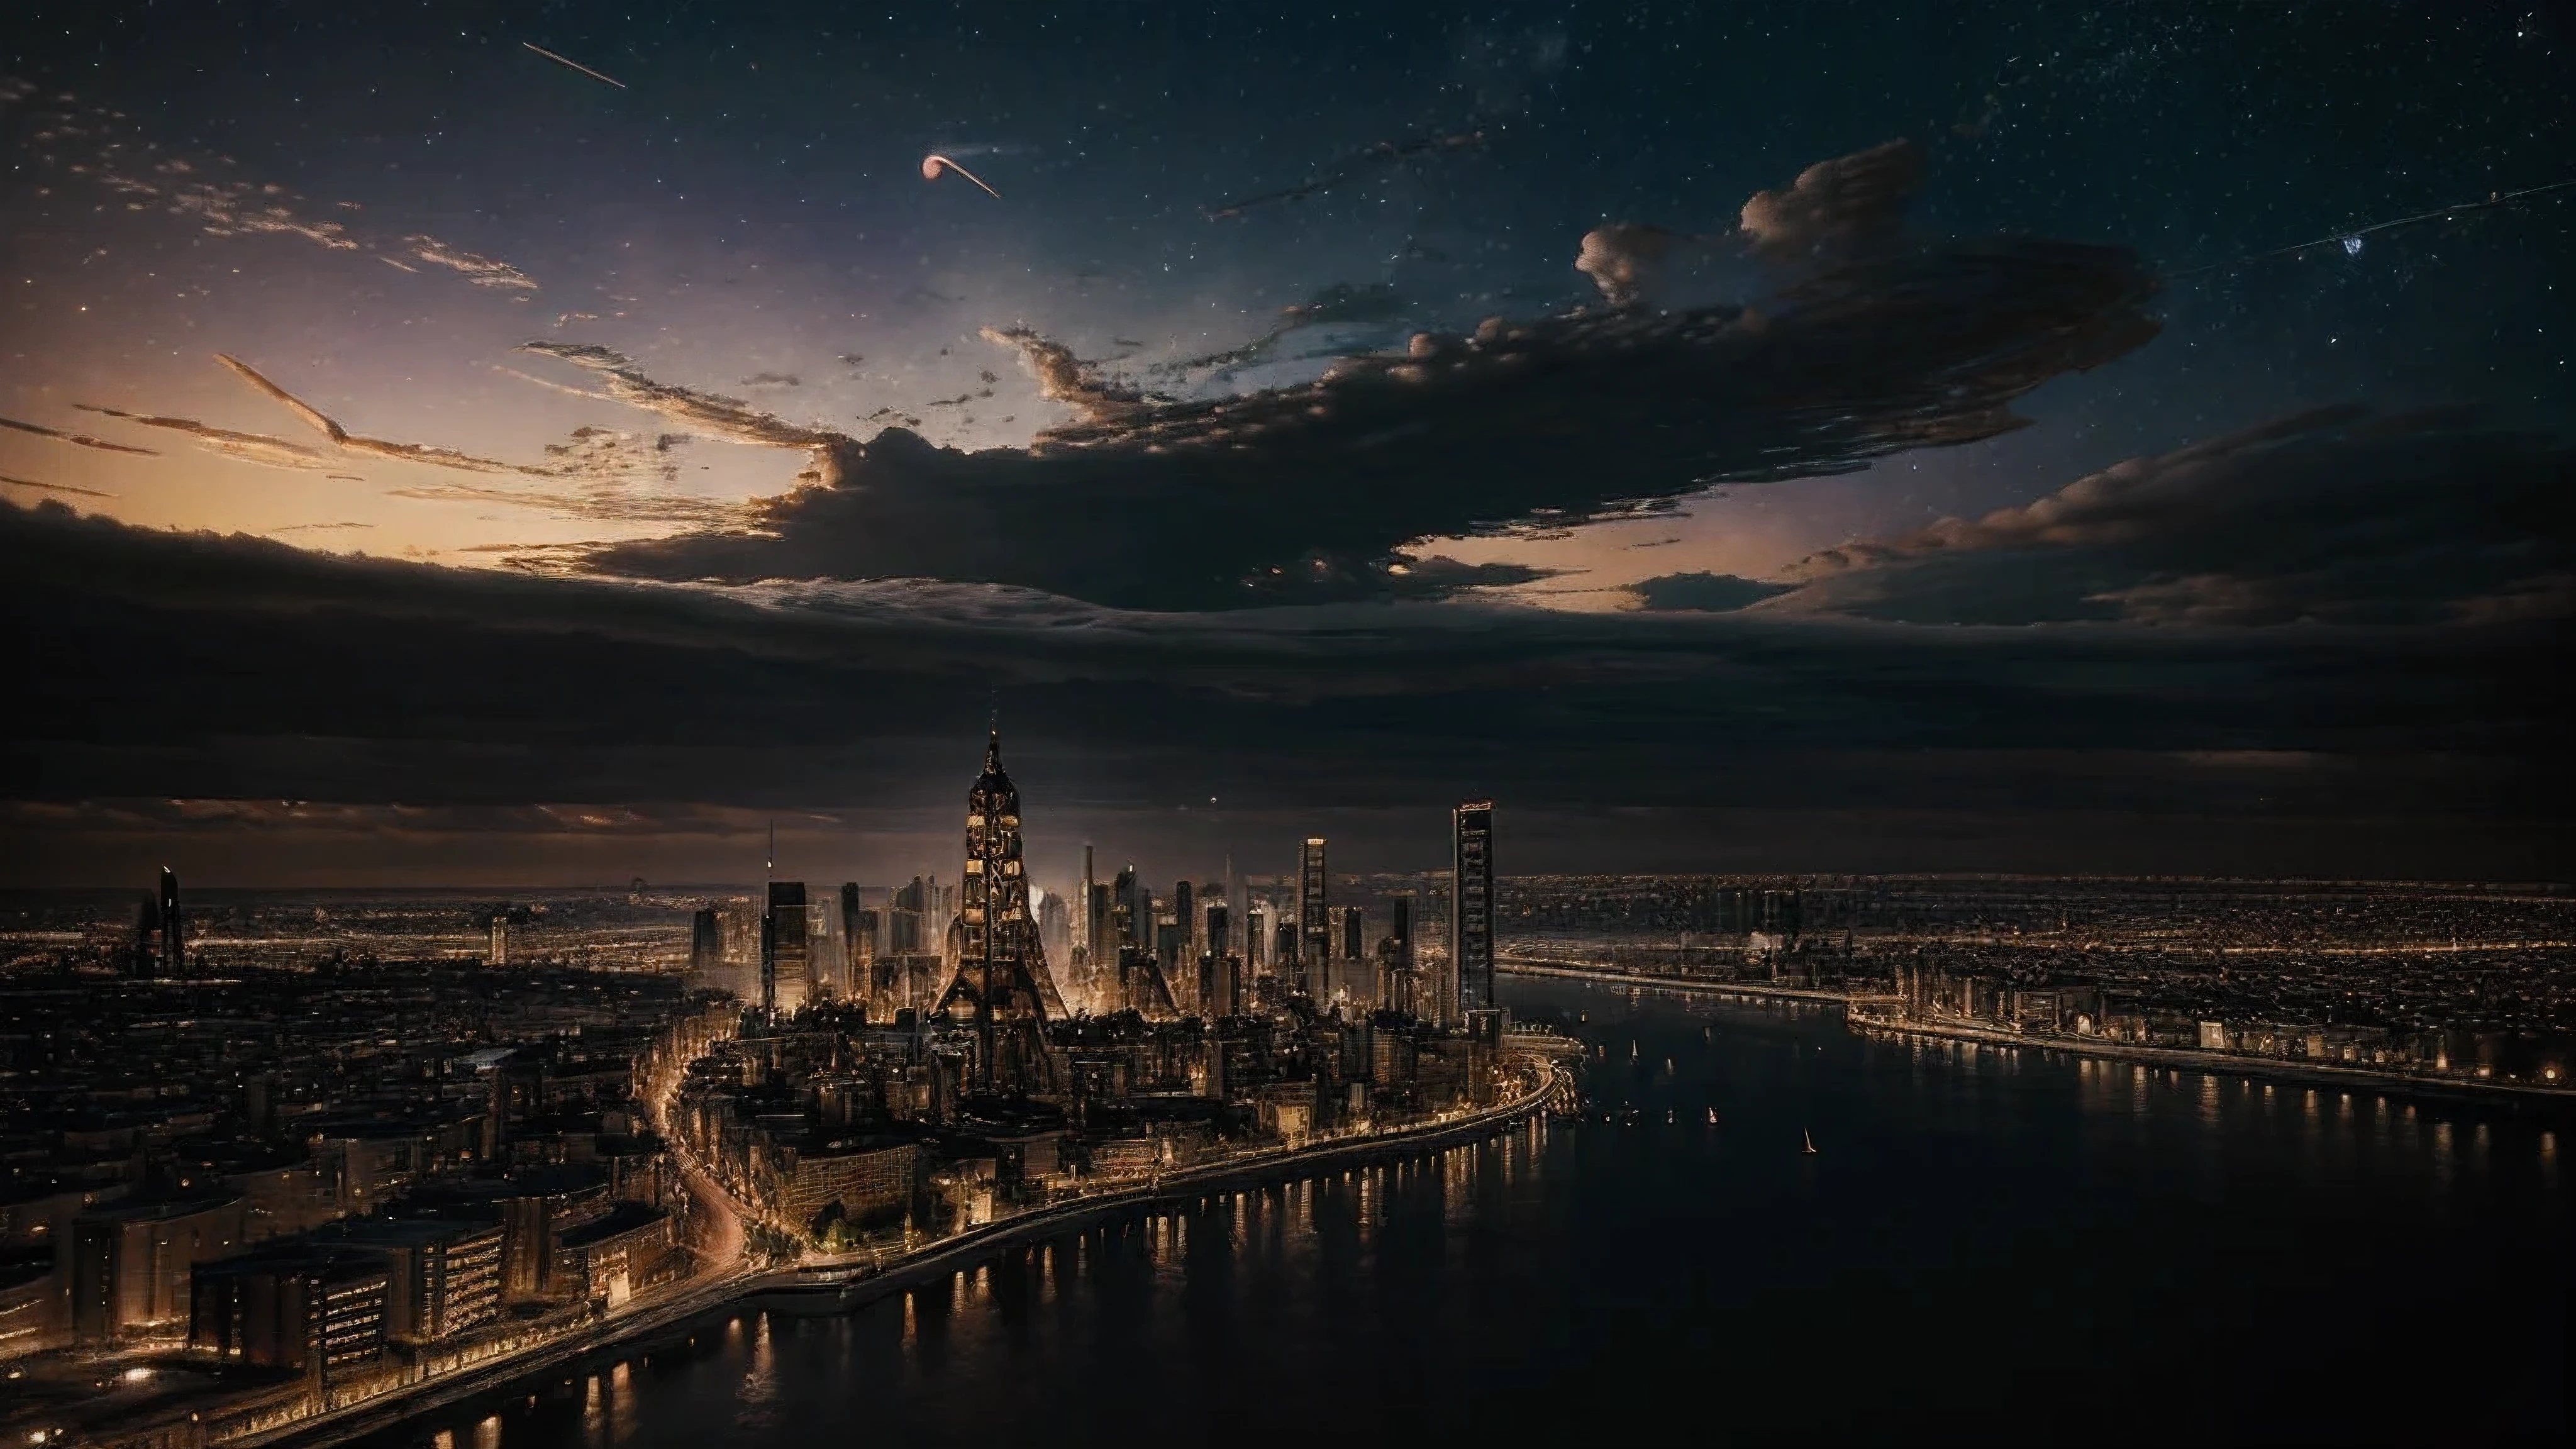 Exquisite and detailed city floating in the sky, summer sunset, steampunk design with starry night sky style, demonic apocalypse
